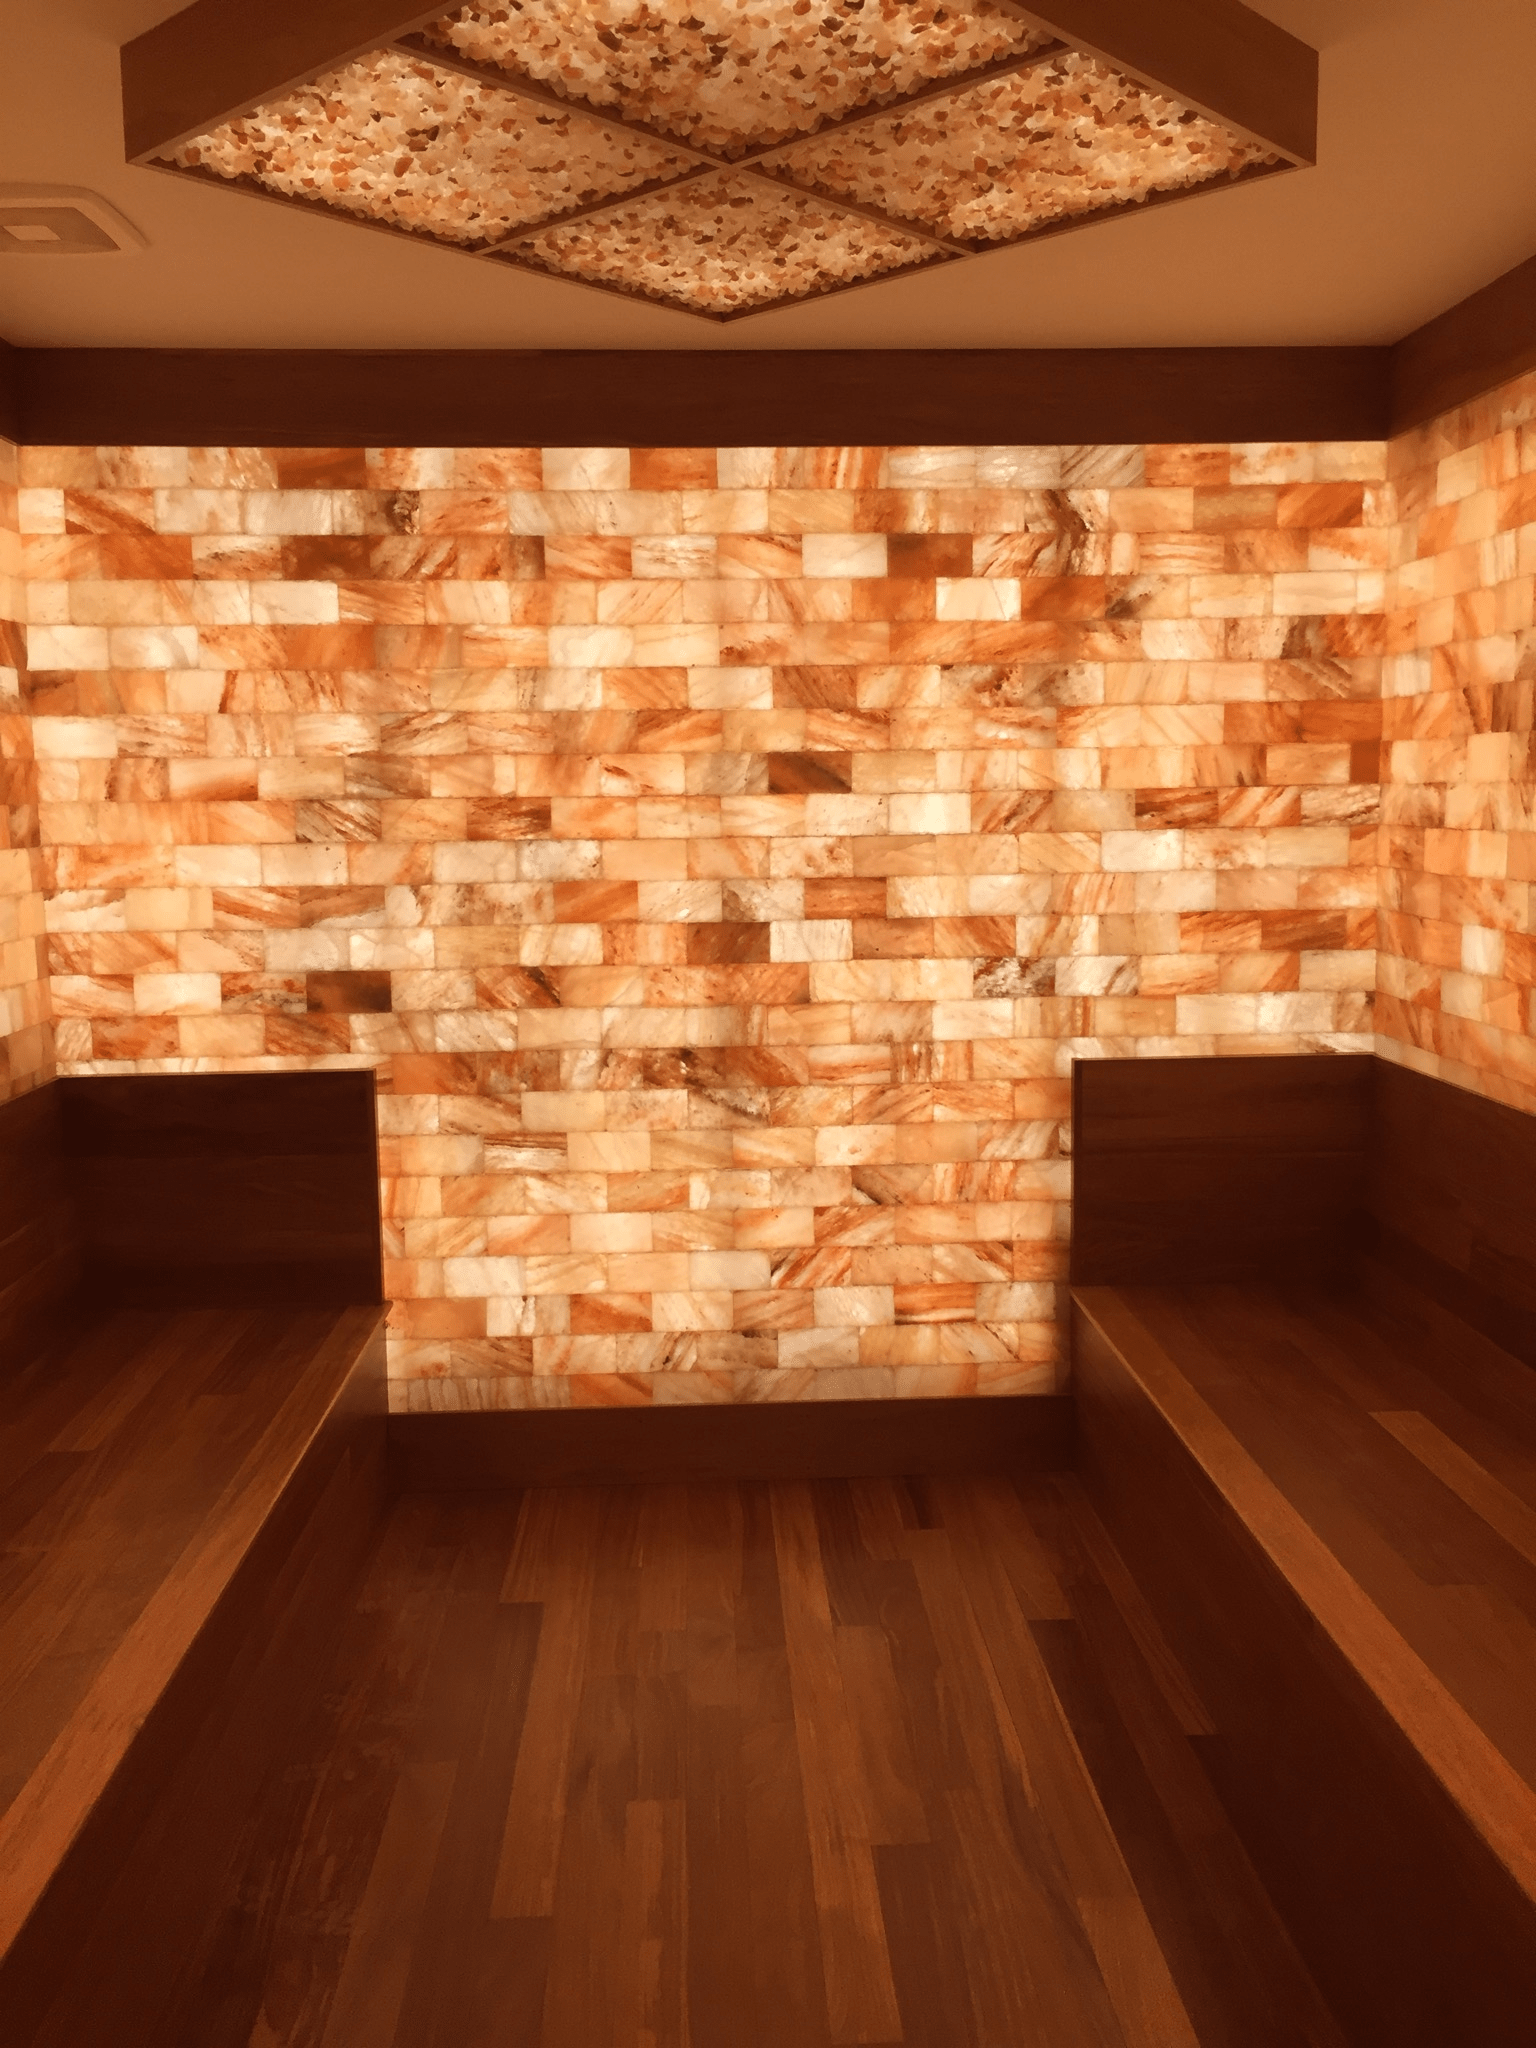 Two Wooden Booths Surrounded By Led Backlit Salt Panels And A Slat Brick Ceiling Fixture At Palm Health - Ladue, Missouri.